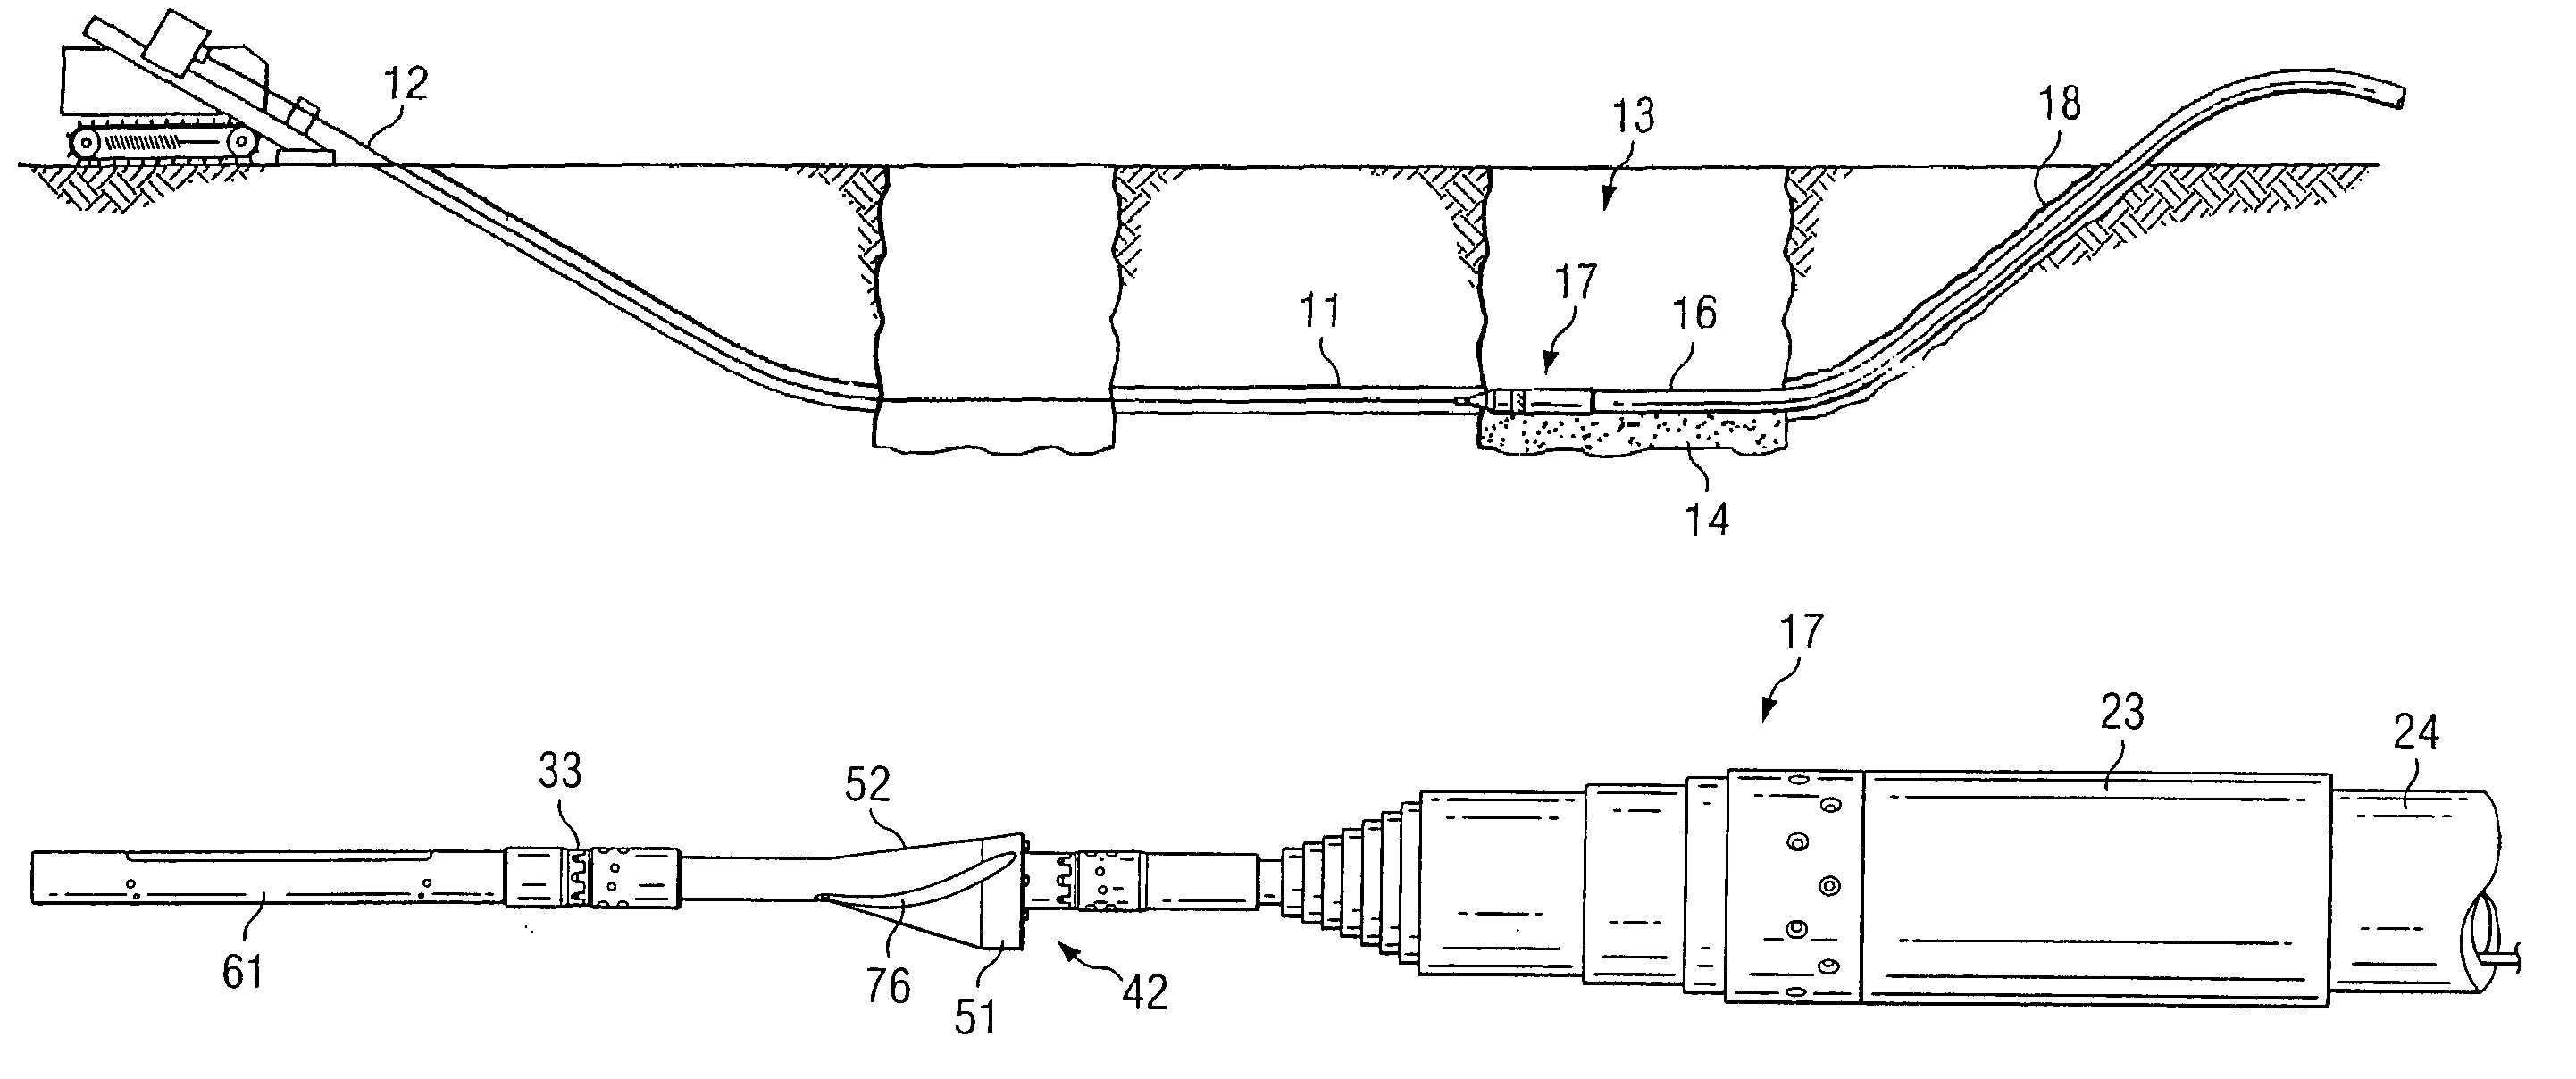 Method and apparatus for on-grade boring